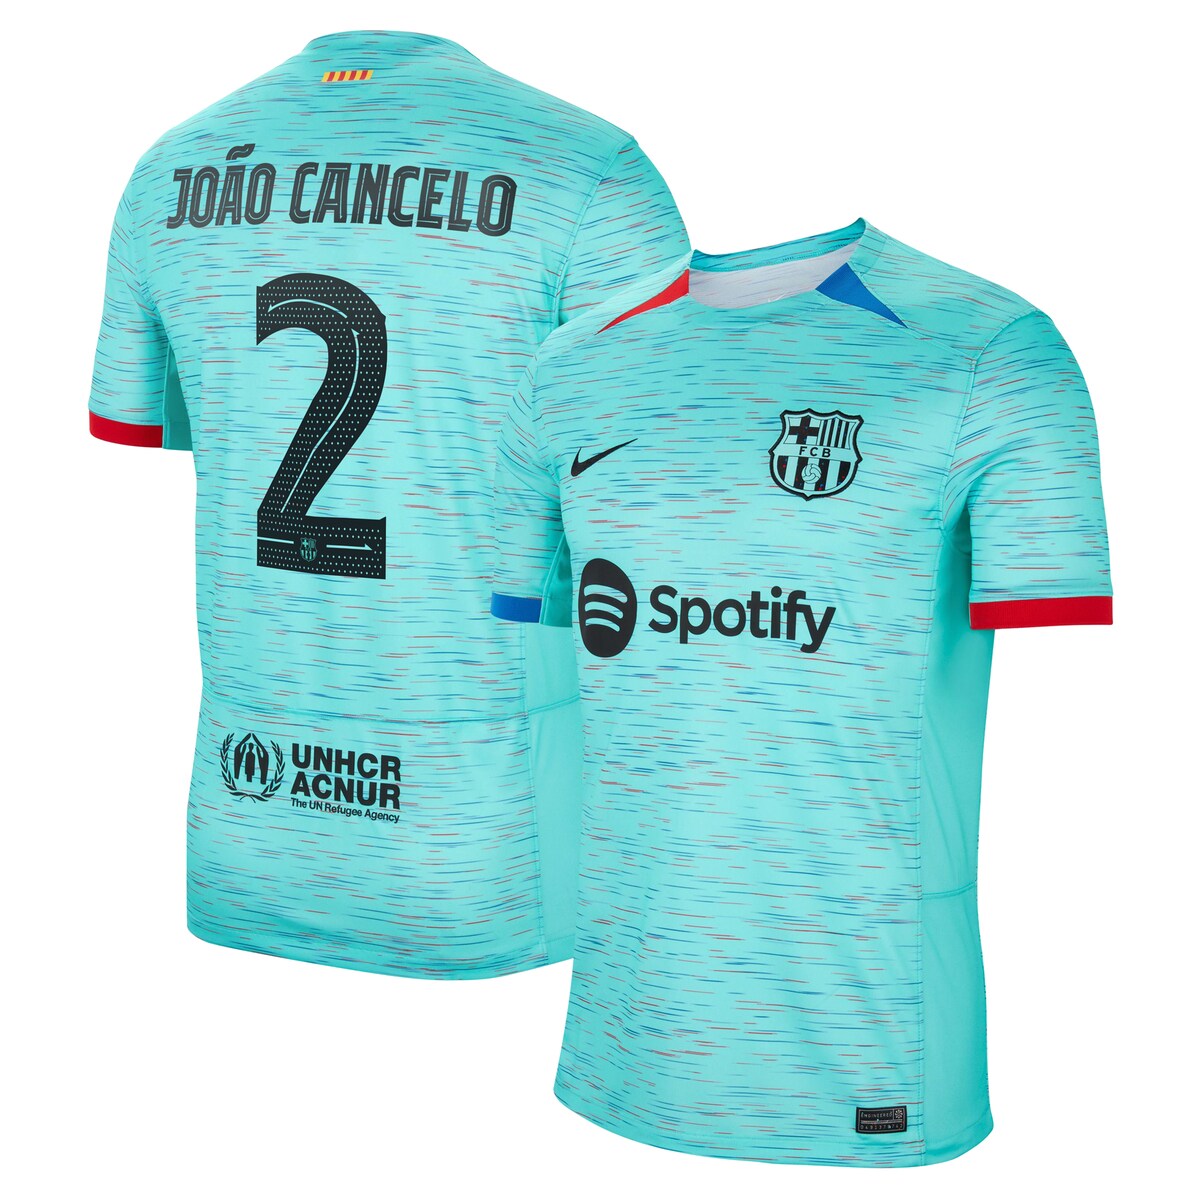 E[K oZi JZ vJ jtH[ Nike iCL Y ANA (NIK 2023/24 Men's Replica Jersey - Player)